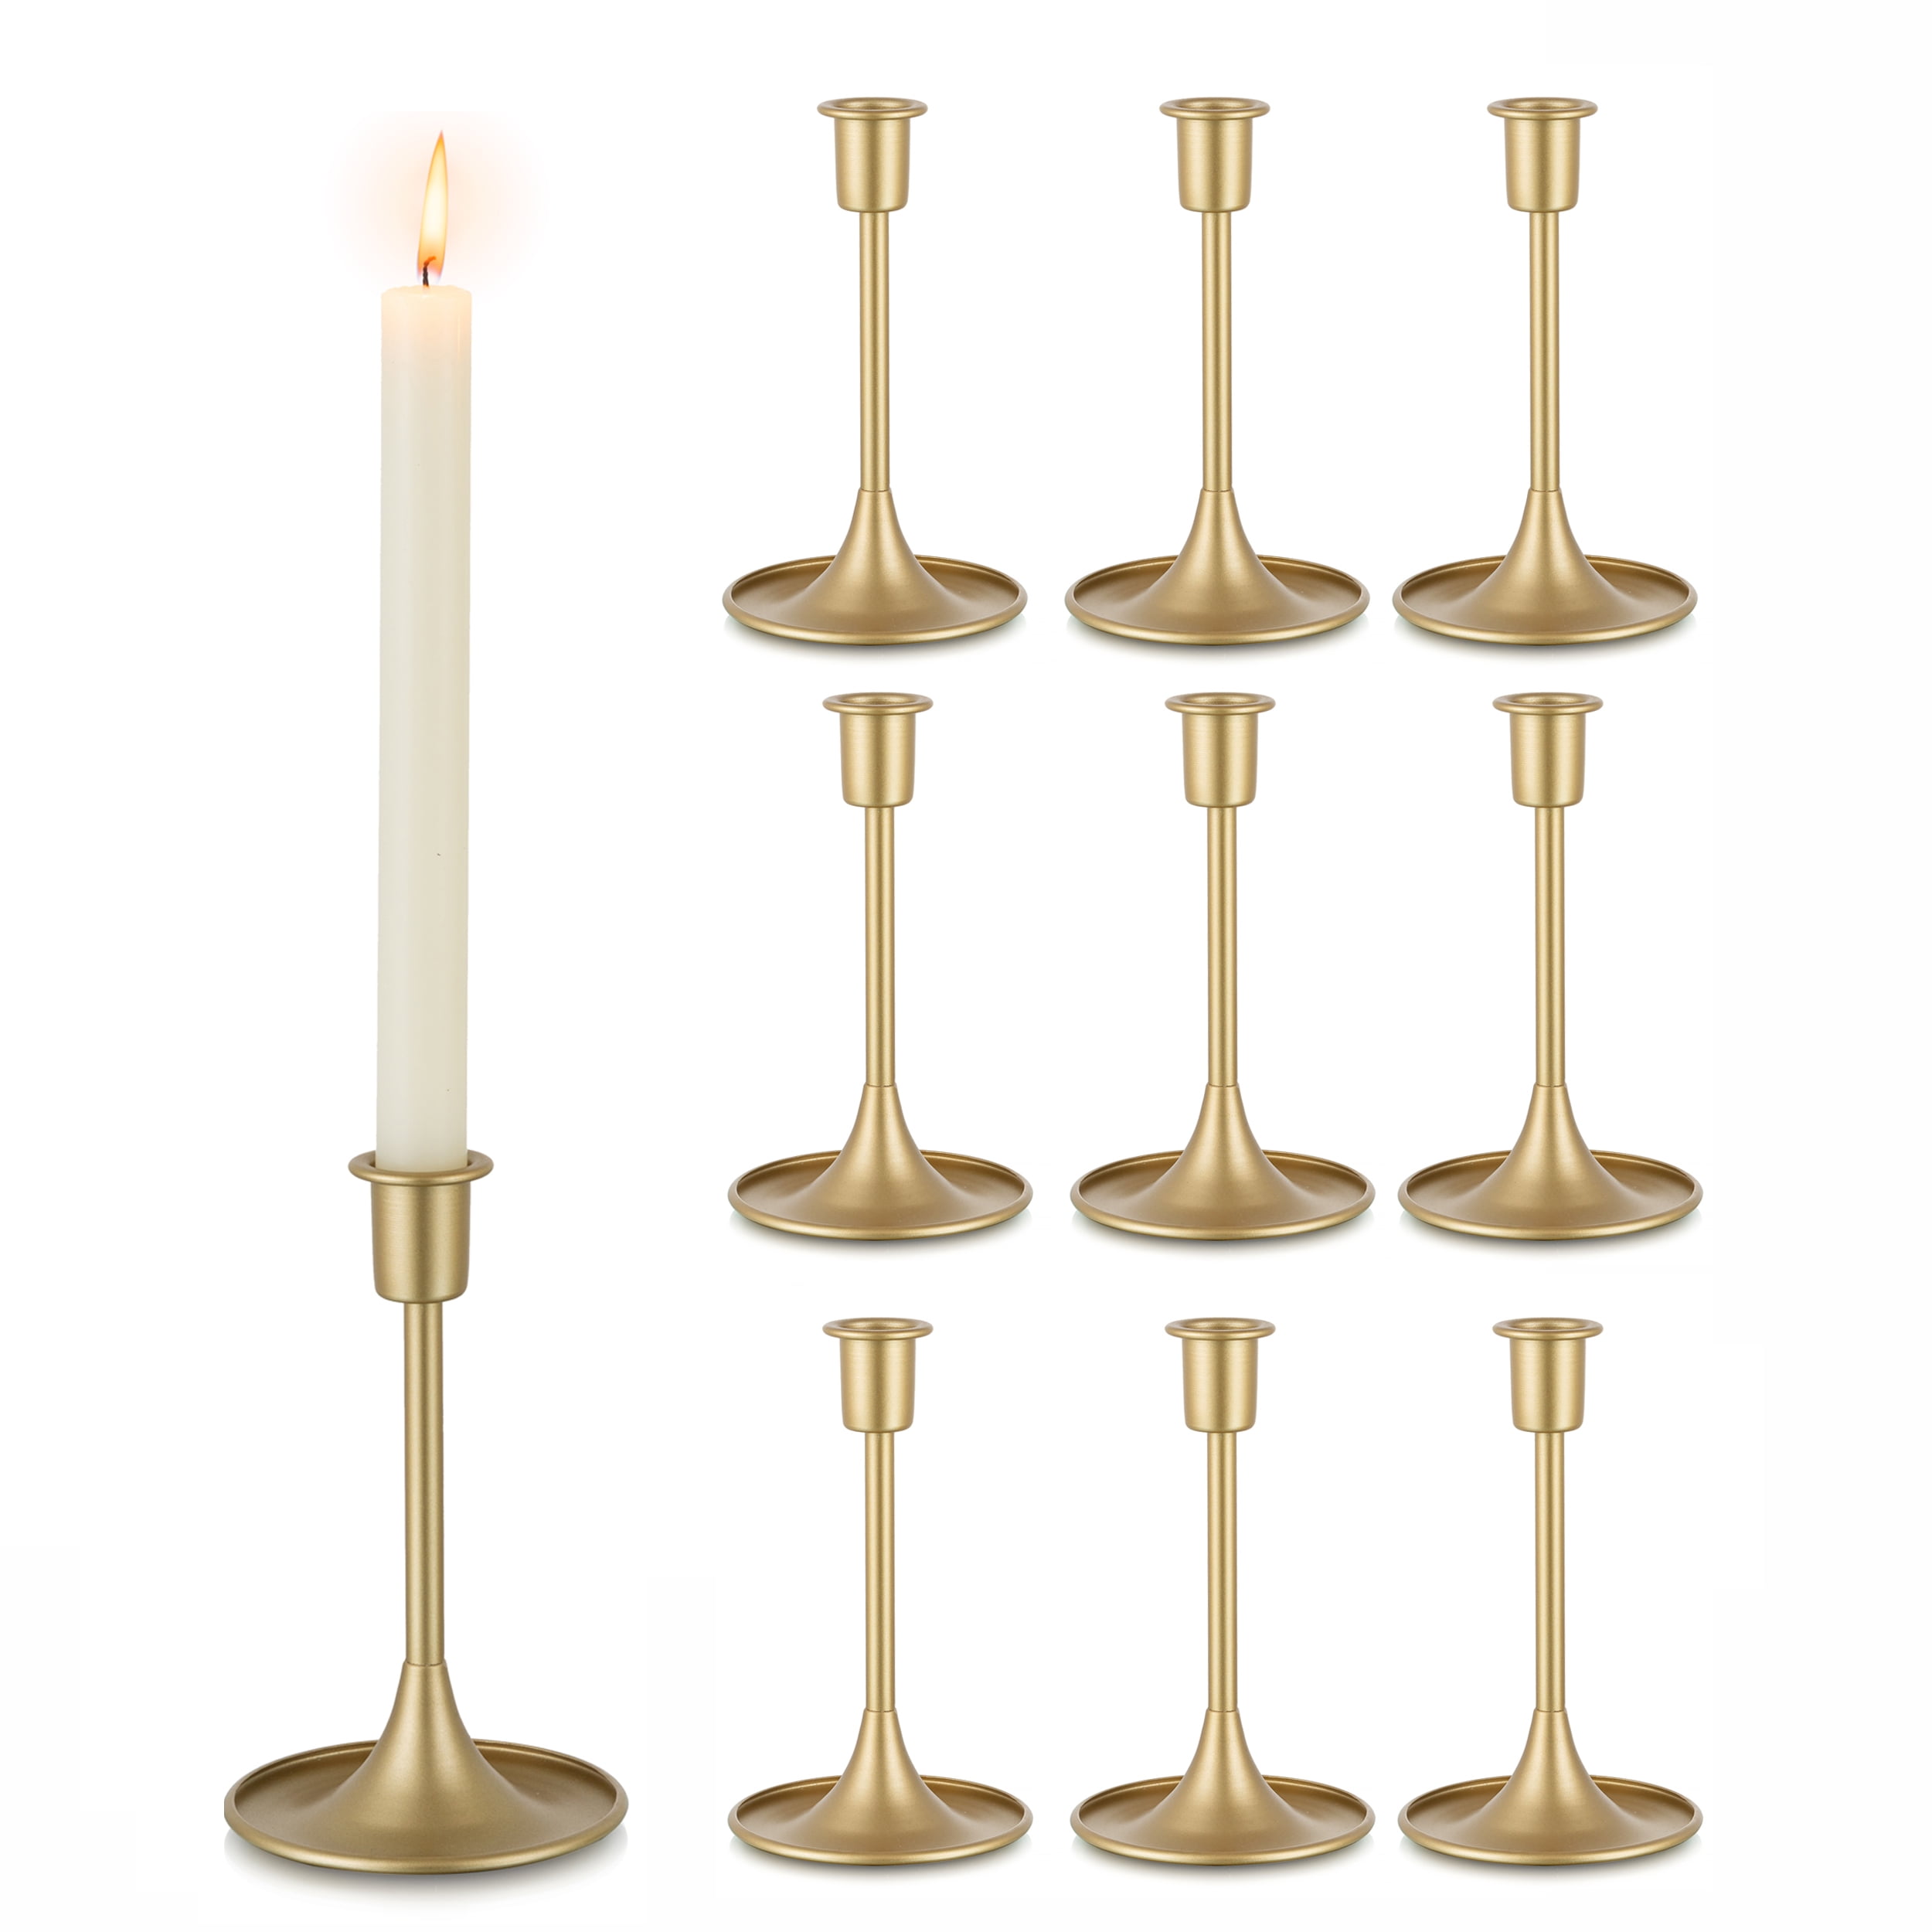 Sziqiqi Vintage Brass Candlestick Holder for Taper Candles Set of